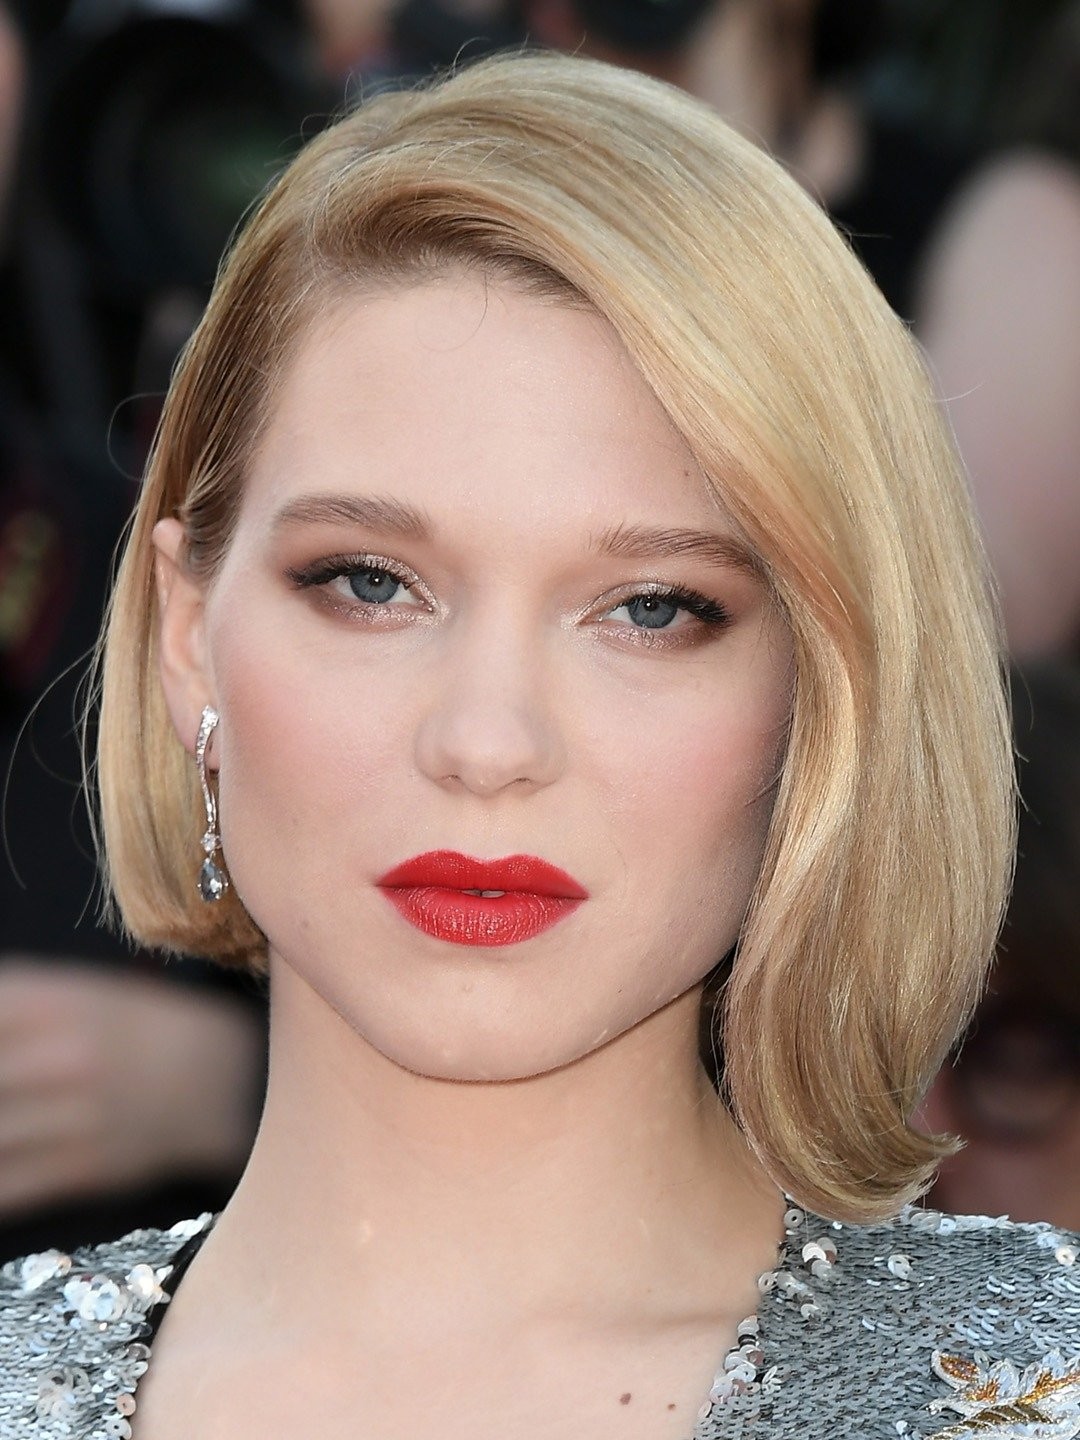 Dune Part Two: Léa Seydoux will play an important character from the book